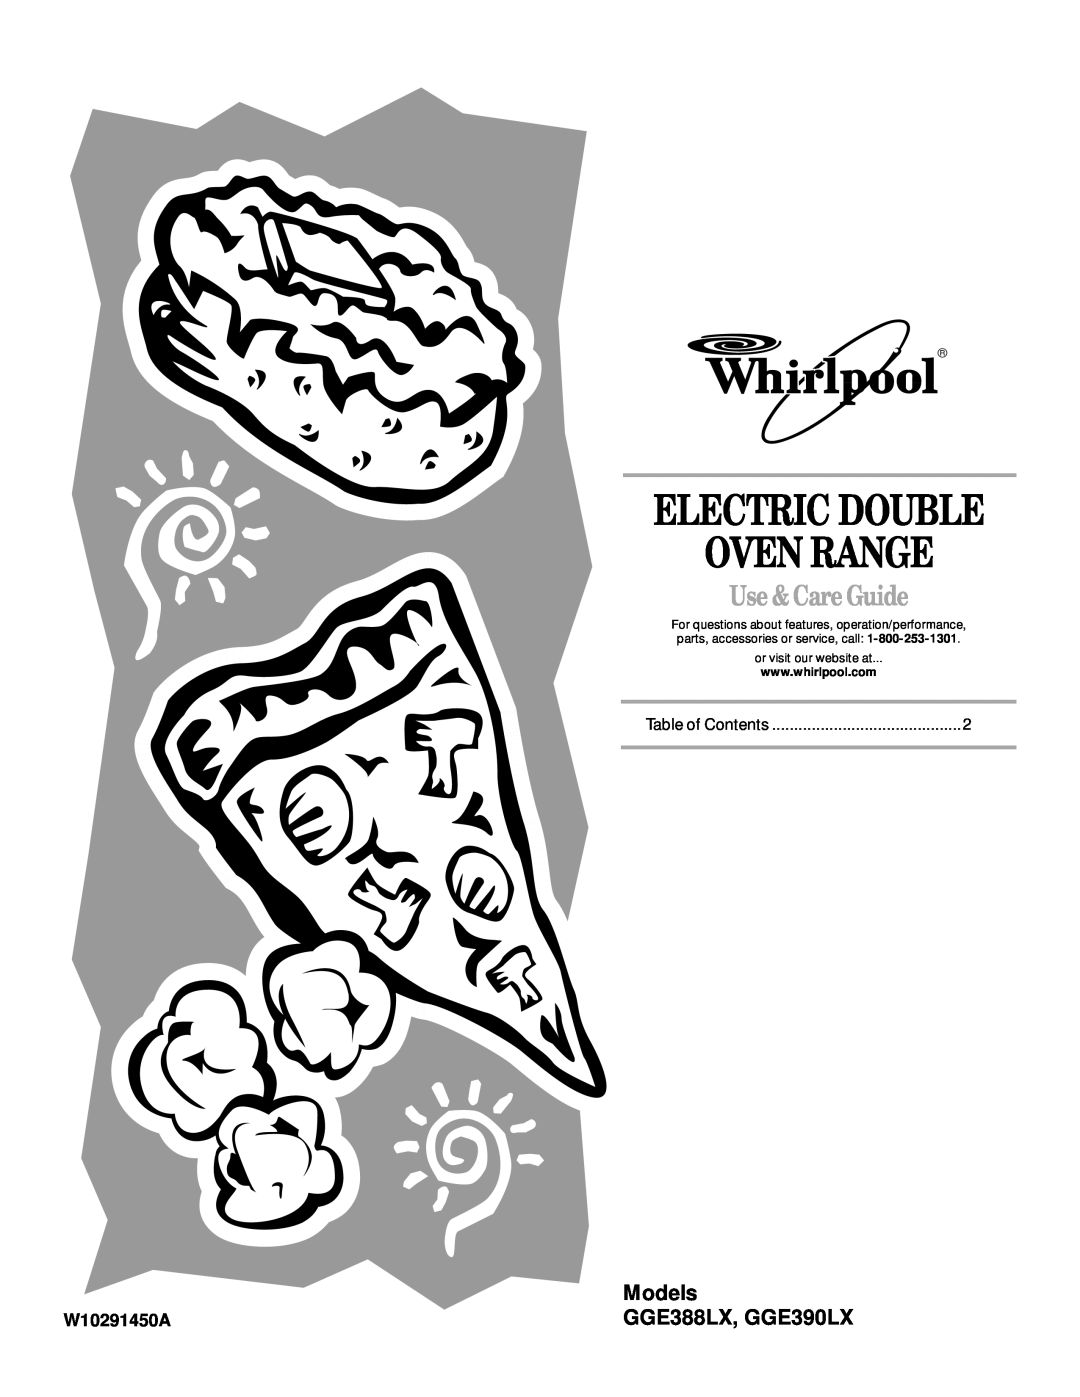 Whirlpool manual GGE388LX, GGE390LX, Electric Double Oven Range, Use&CareGuide, Models, or visit our website at 